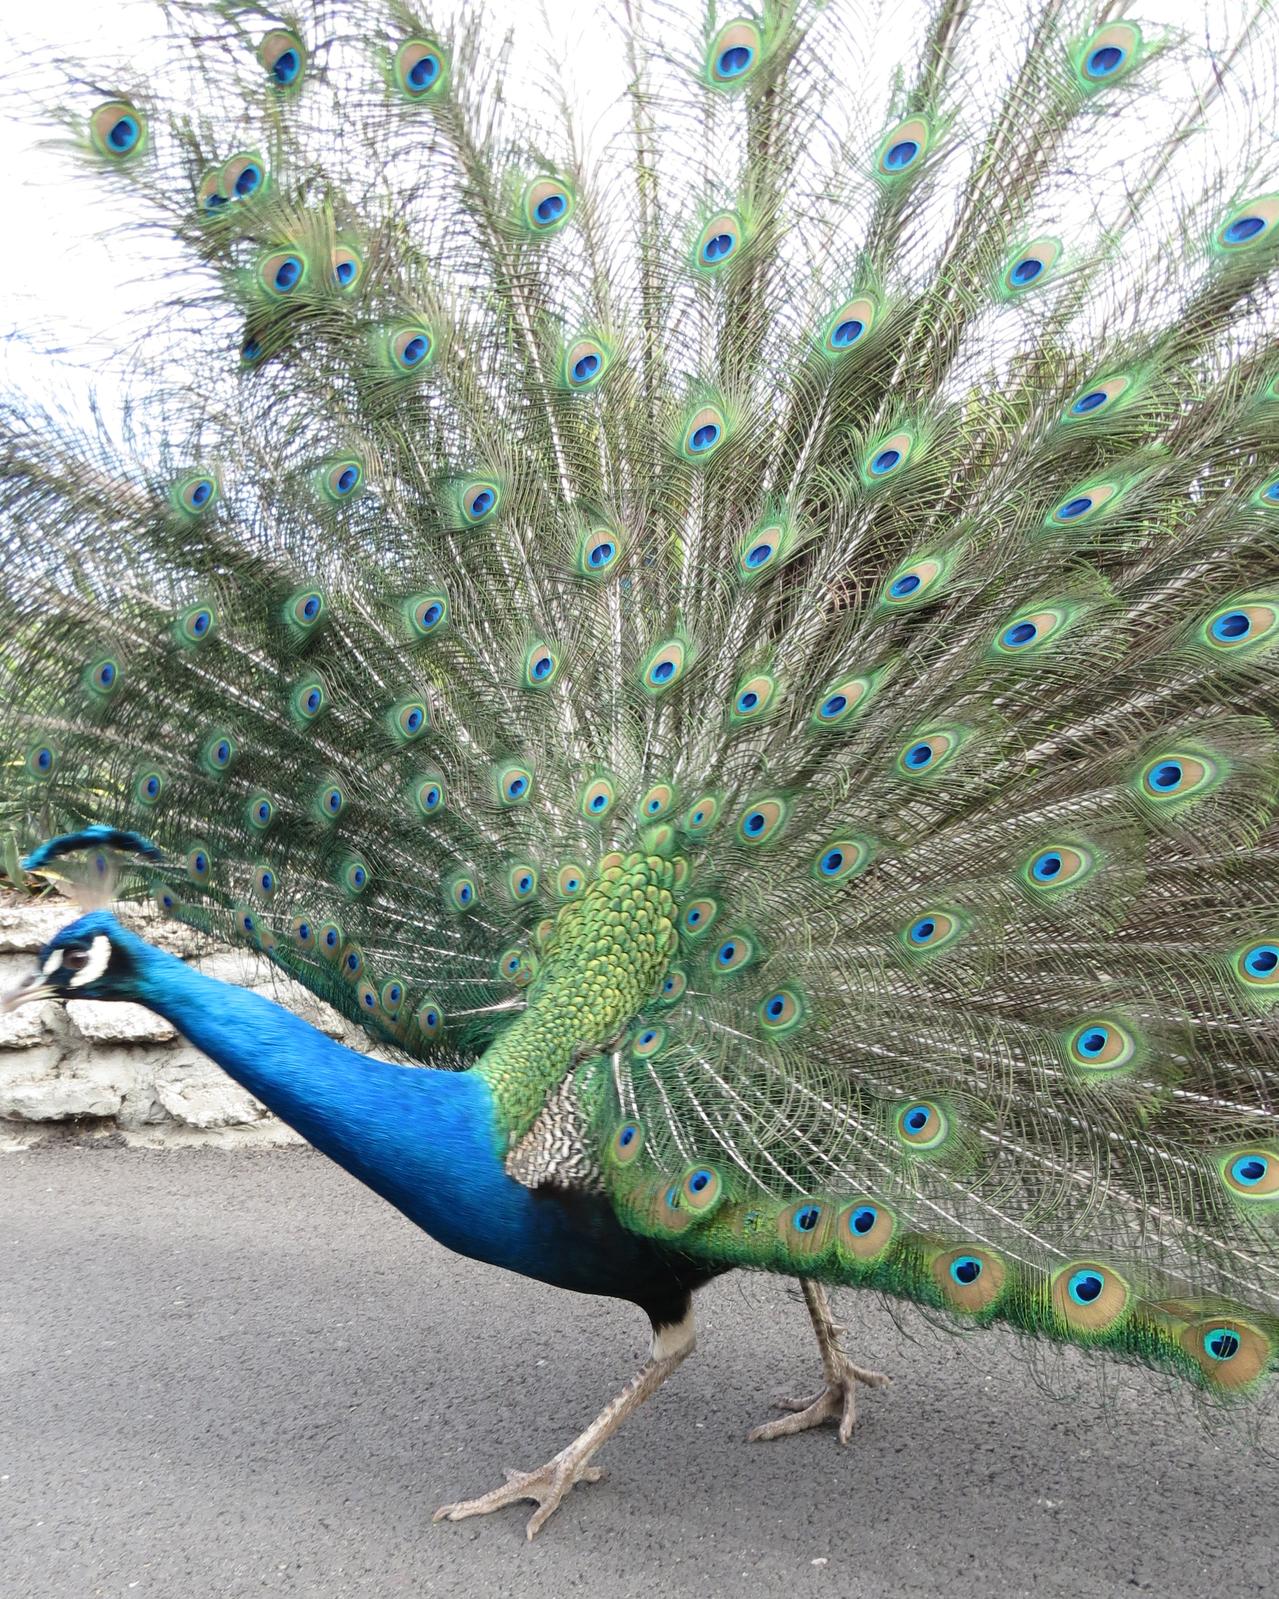 Indian Peafowl Photo by David Bell